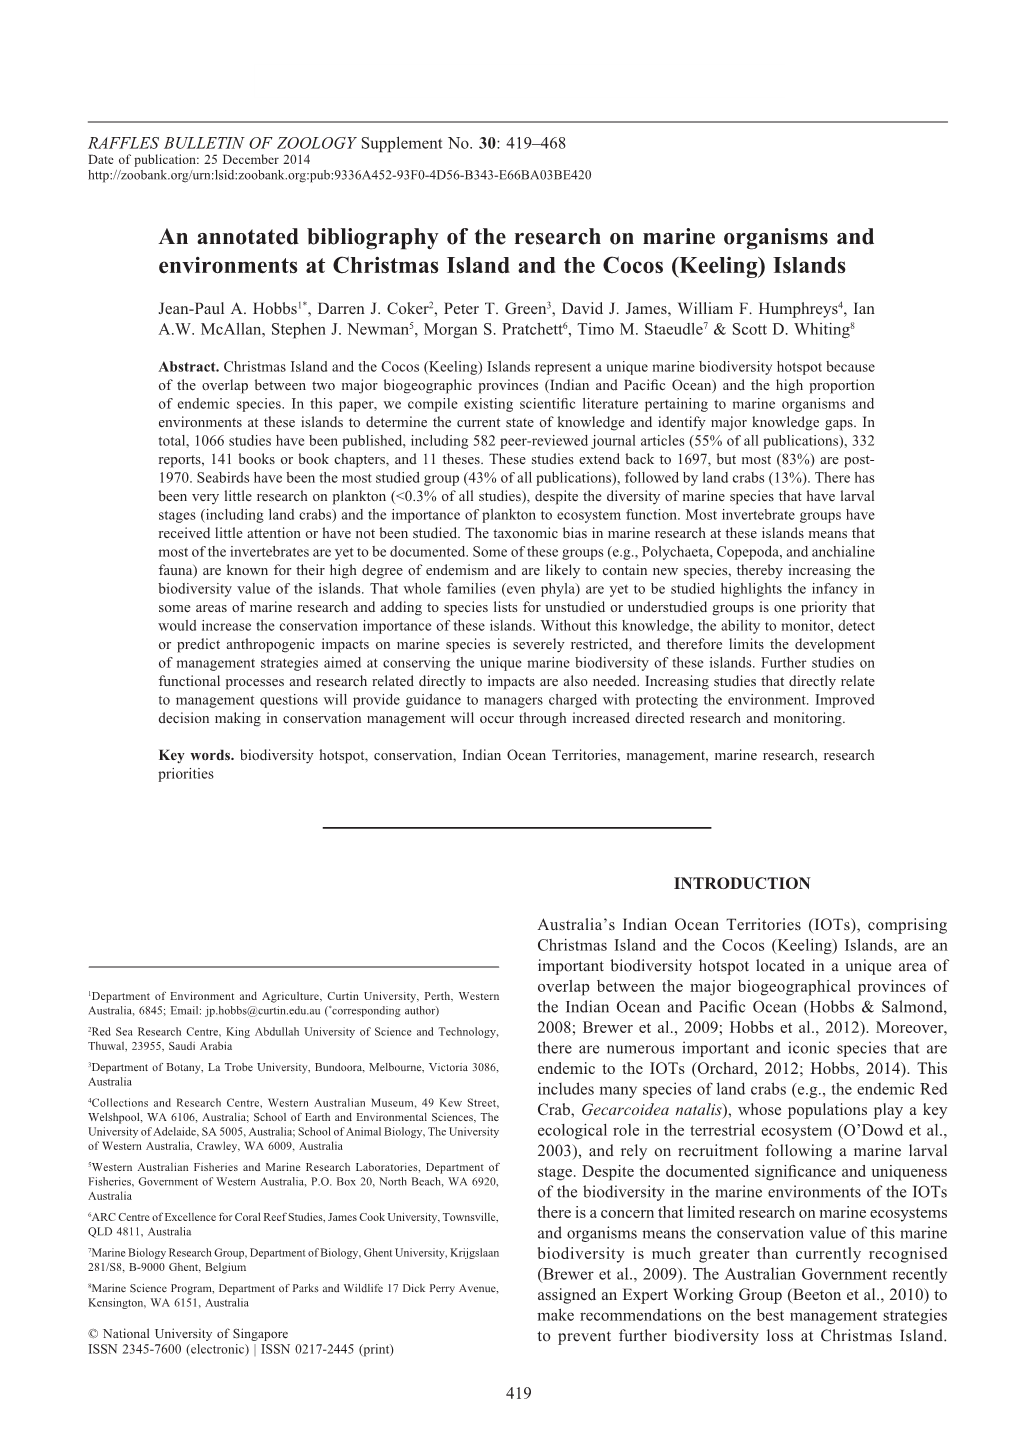 An Annotated Bibliography of the Research on Marine Organisms and Environments at Christmas Island and the Cocos (Keeling) Islands